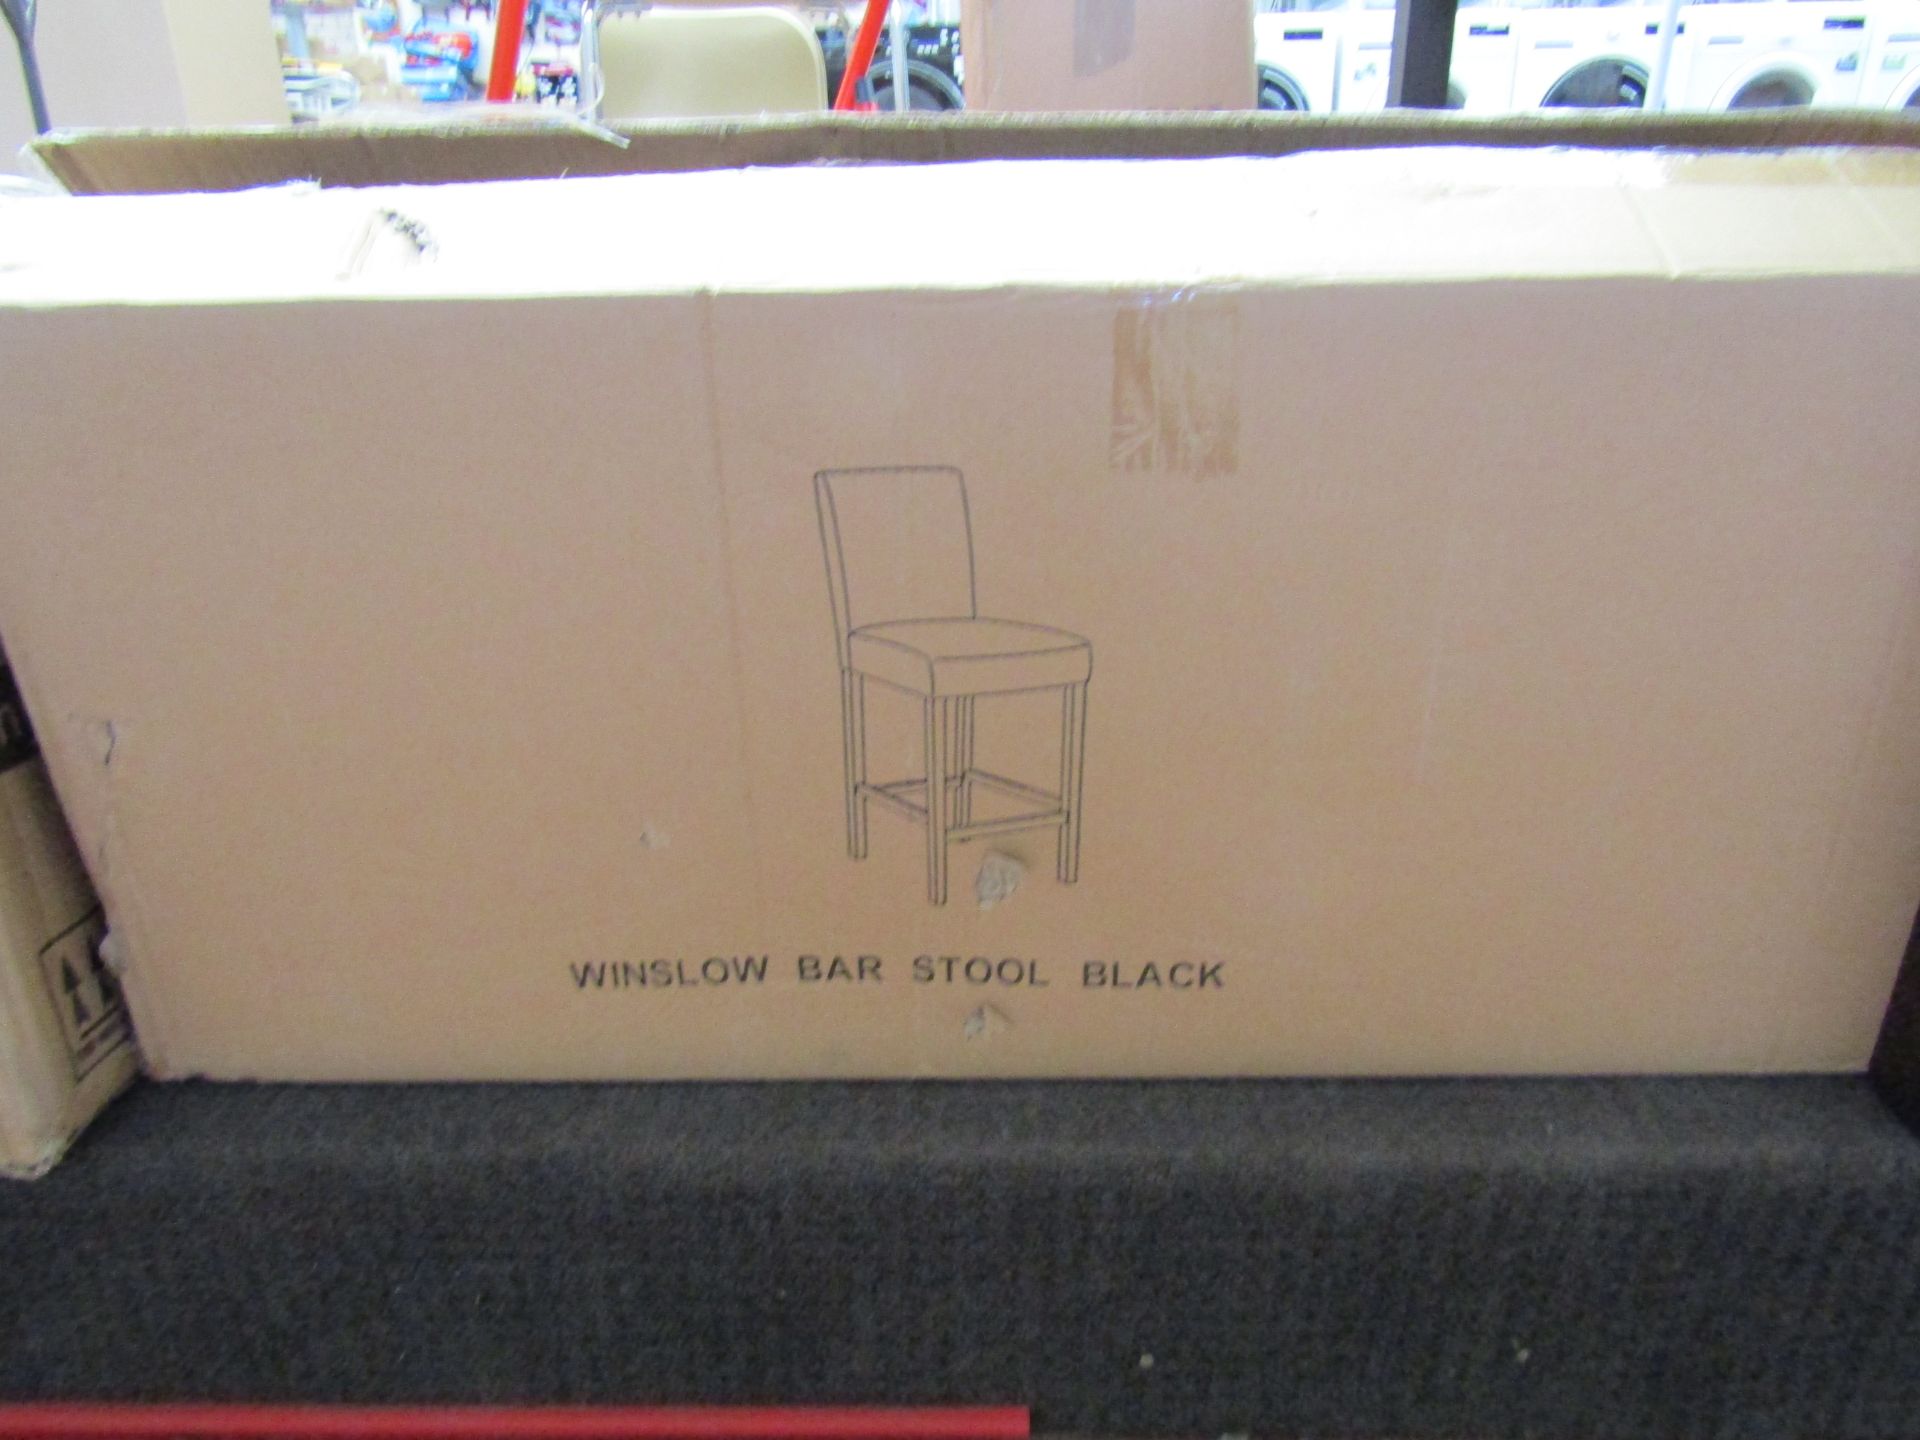 Winslow Black Leather Effect Bar Stool. Size H100, W41, D50cm. Boxed & Unchecked. Please Note - Image 2 of 2